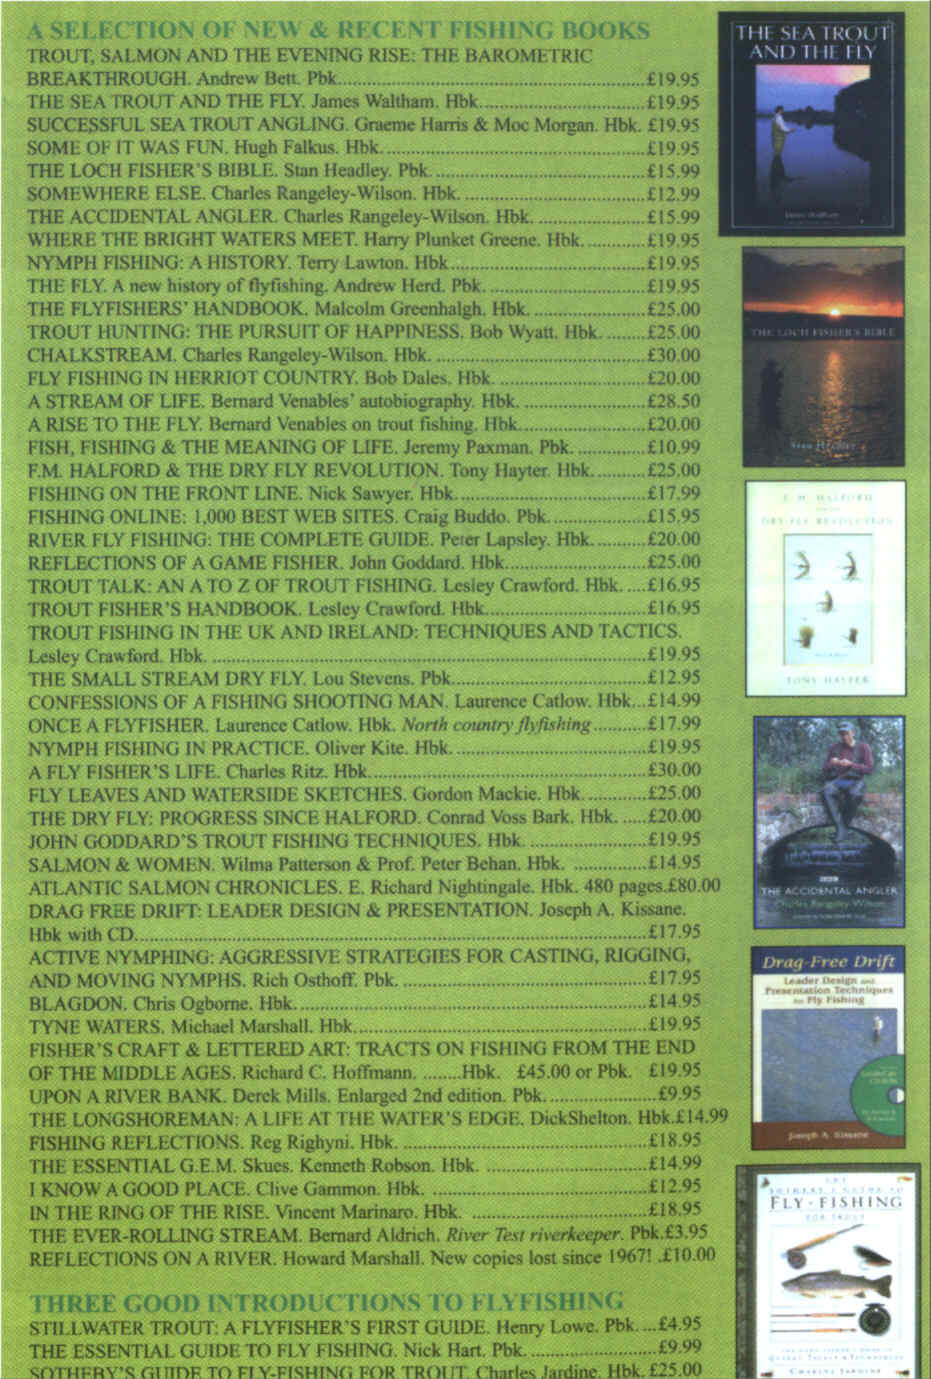 First page of the fishing bookshop books.Fishing Books